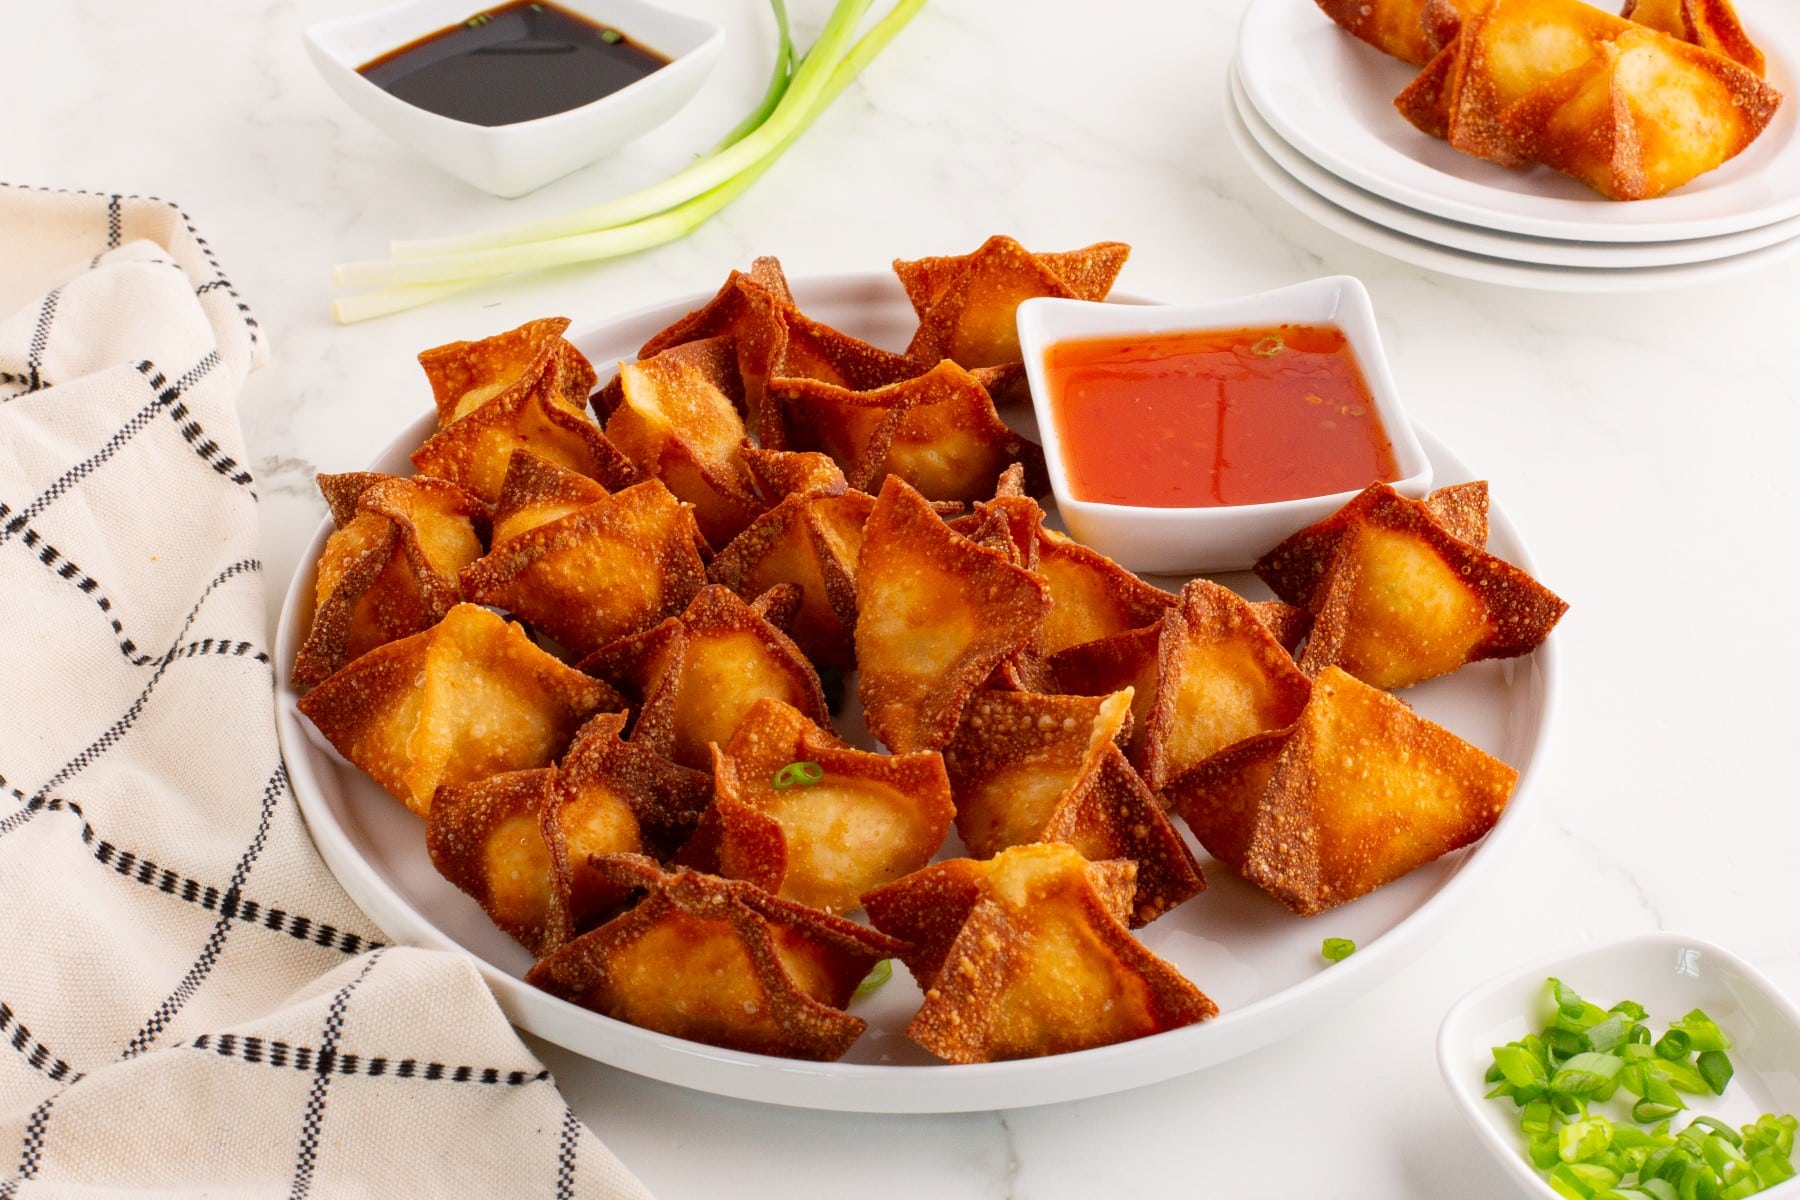 Crab rangoon served on a white platter with a bowl of dipping sauce.